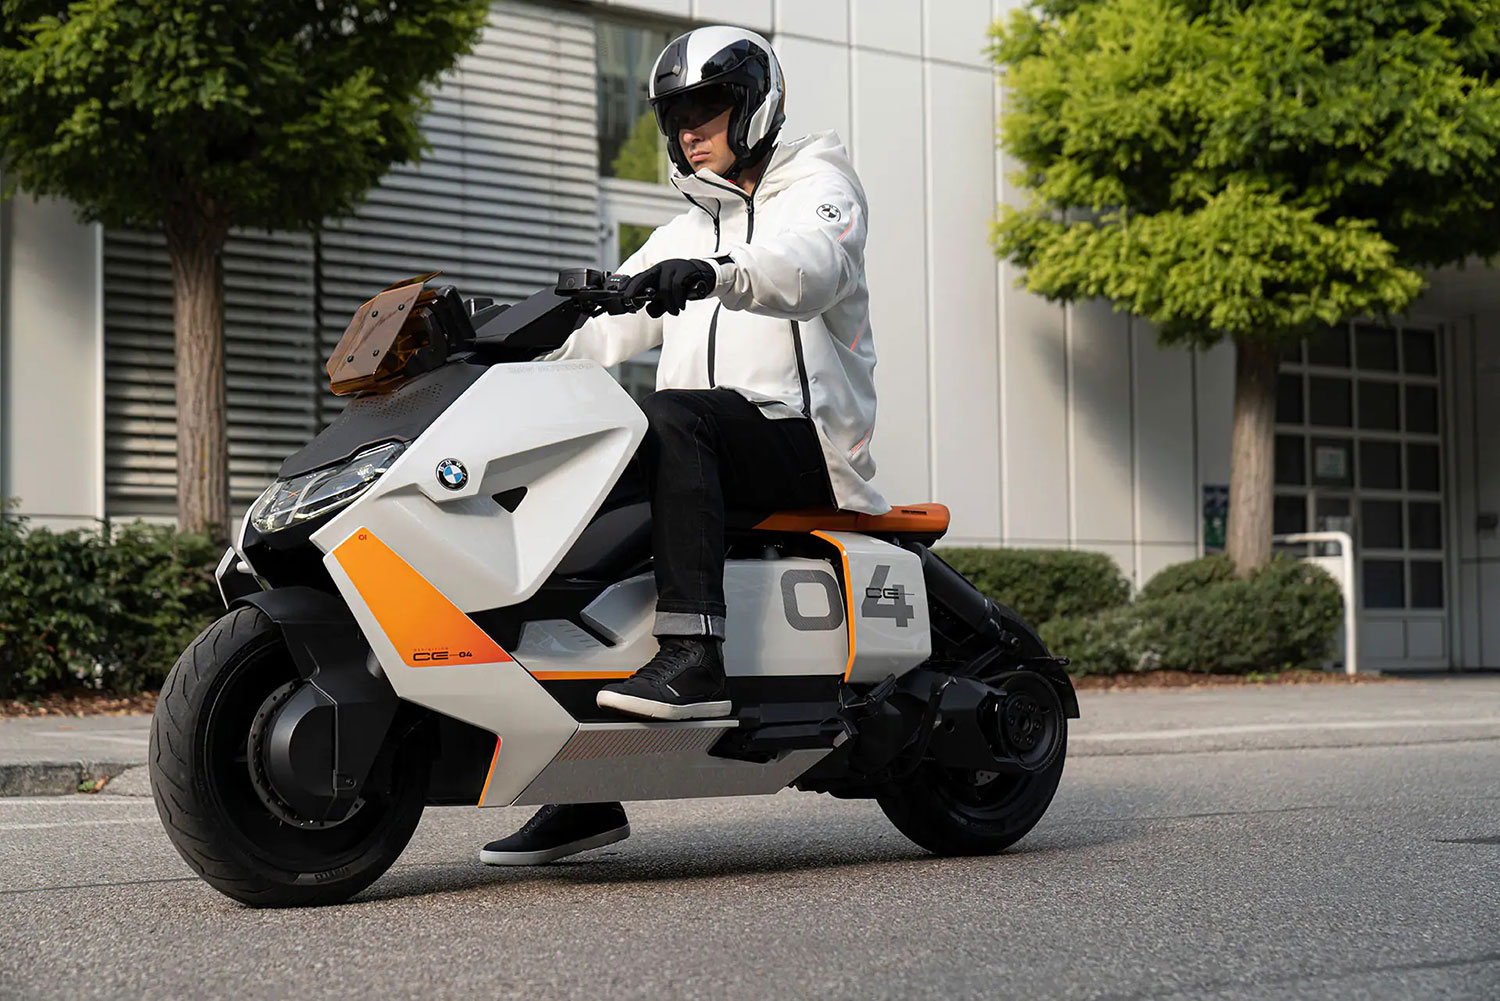 BMW Motorrad unveils new electric scooter concept designed for the city.